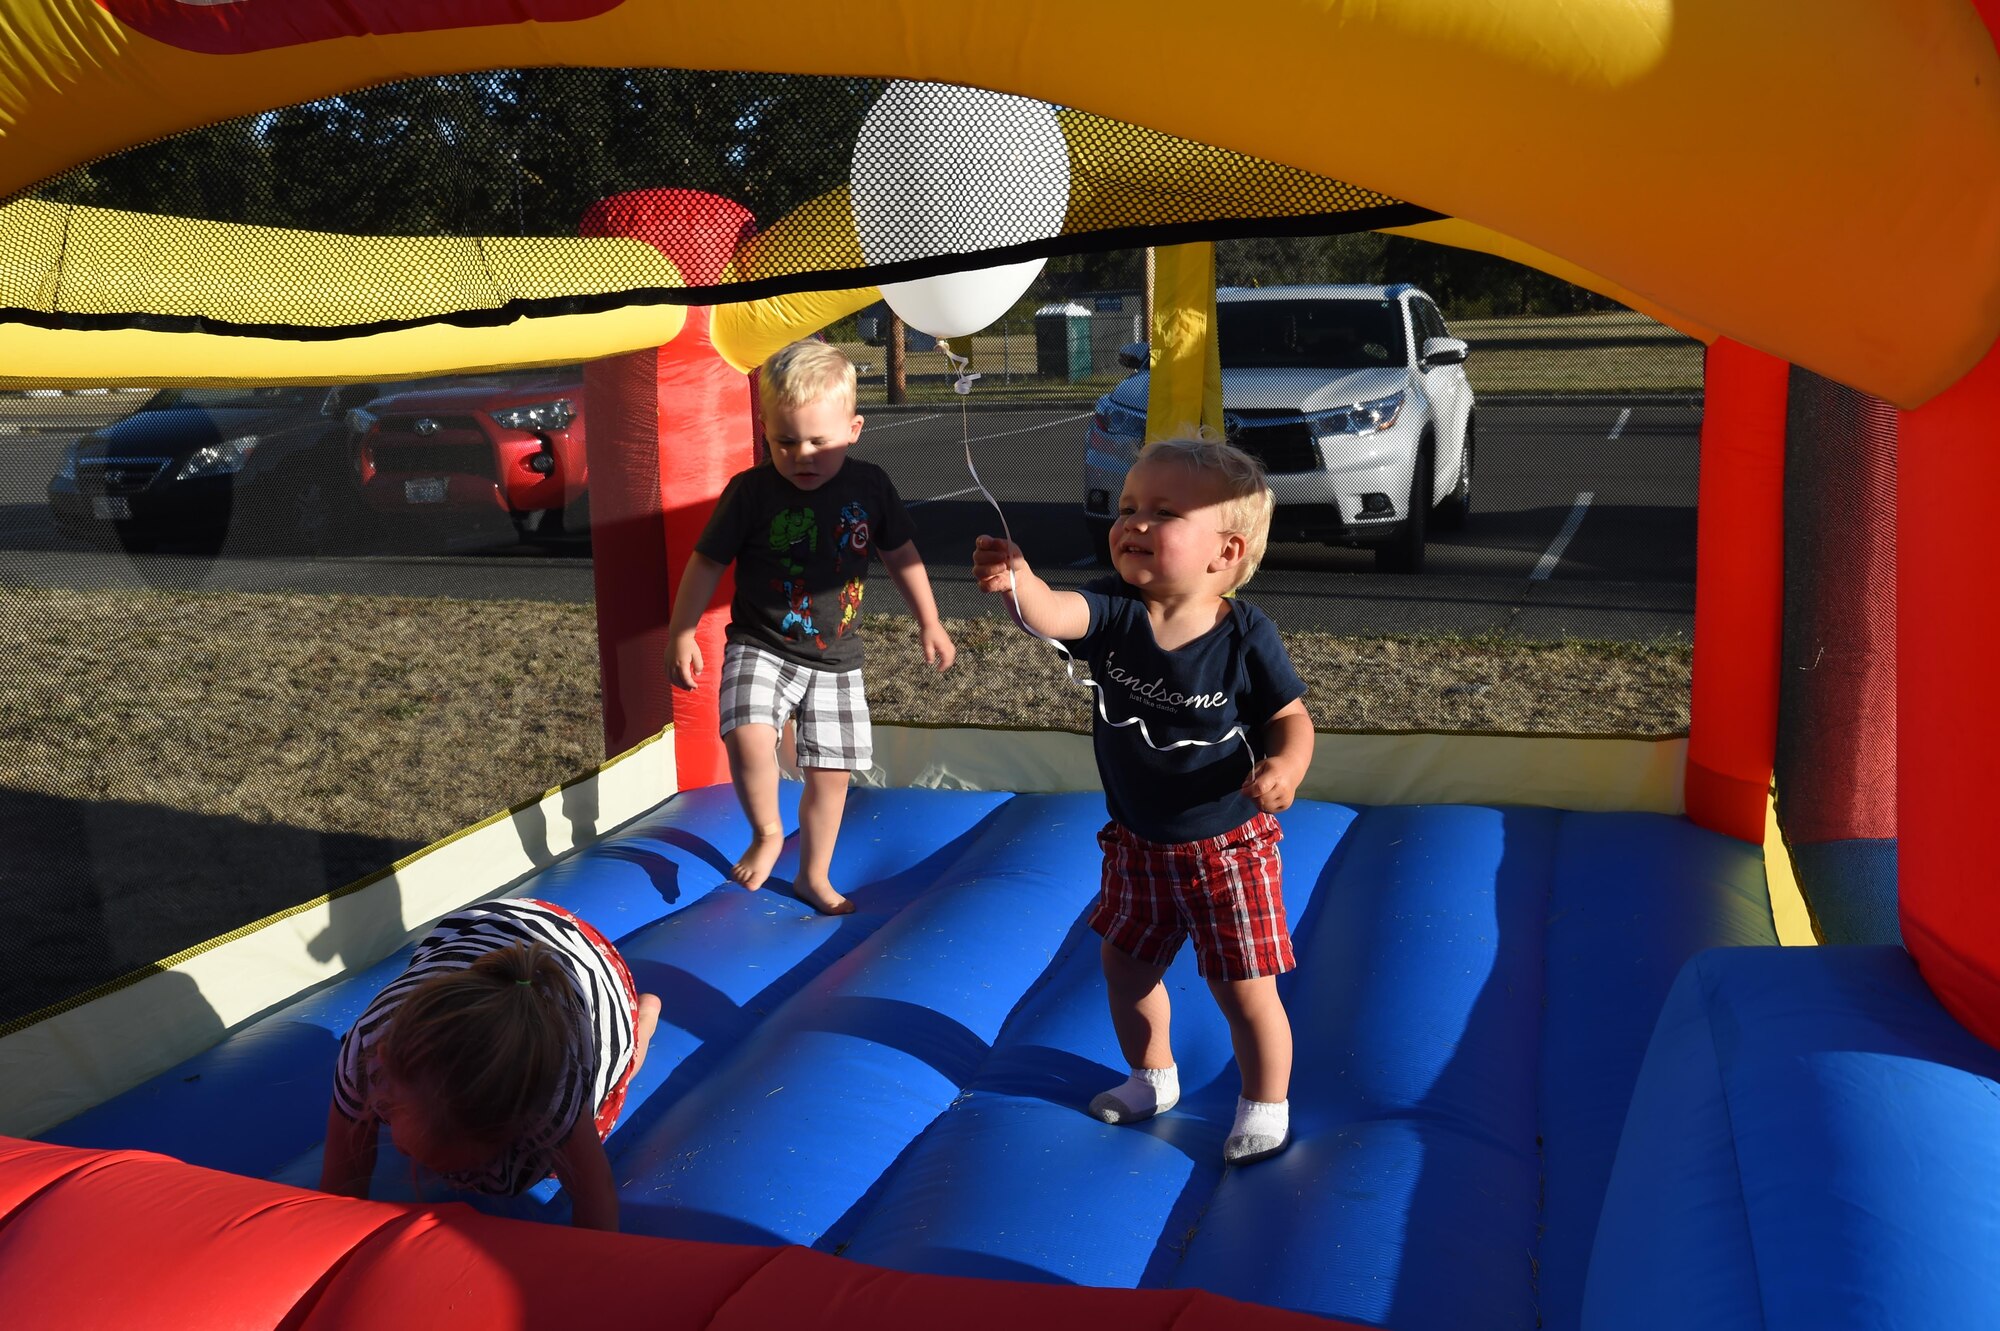 Children of McChord members play in a bouncy castle during the Deployed Family Dinner August 15, 2016, at the Chapel Support Center, Joint Base Lewis-McChord, Wash. More than a dozen kids played in the castles, watched a magician and received a free toy at the event. (U.S. Air Force photo/Staff Sgt. Naomi Shipley)